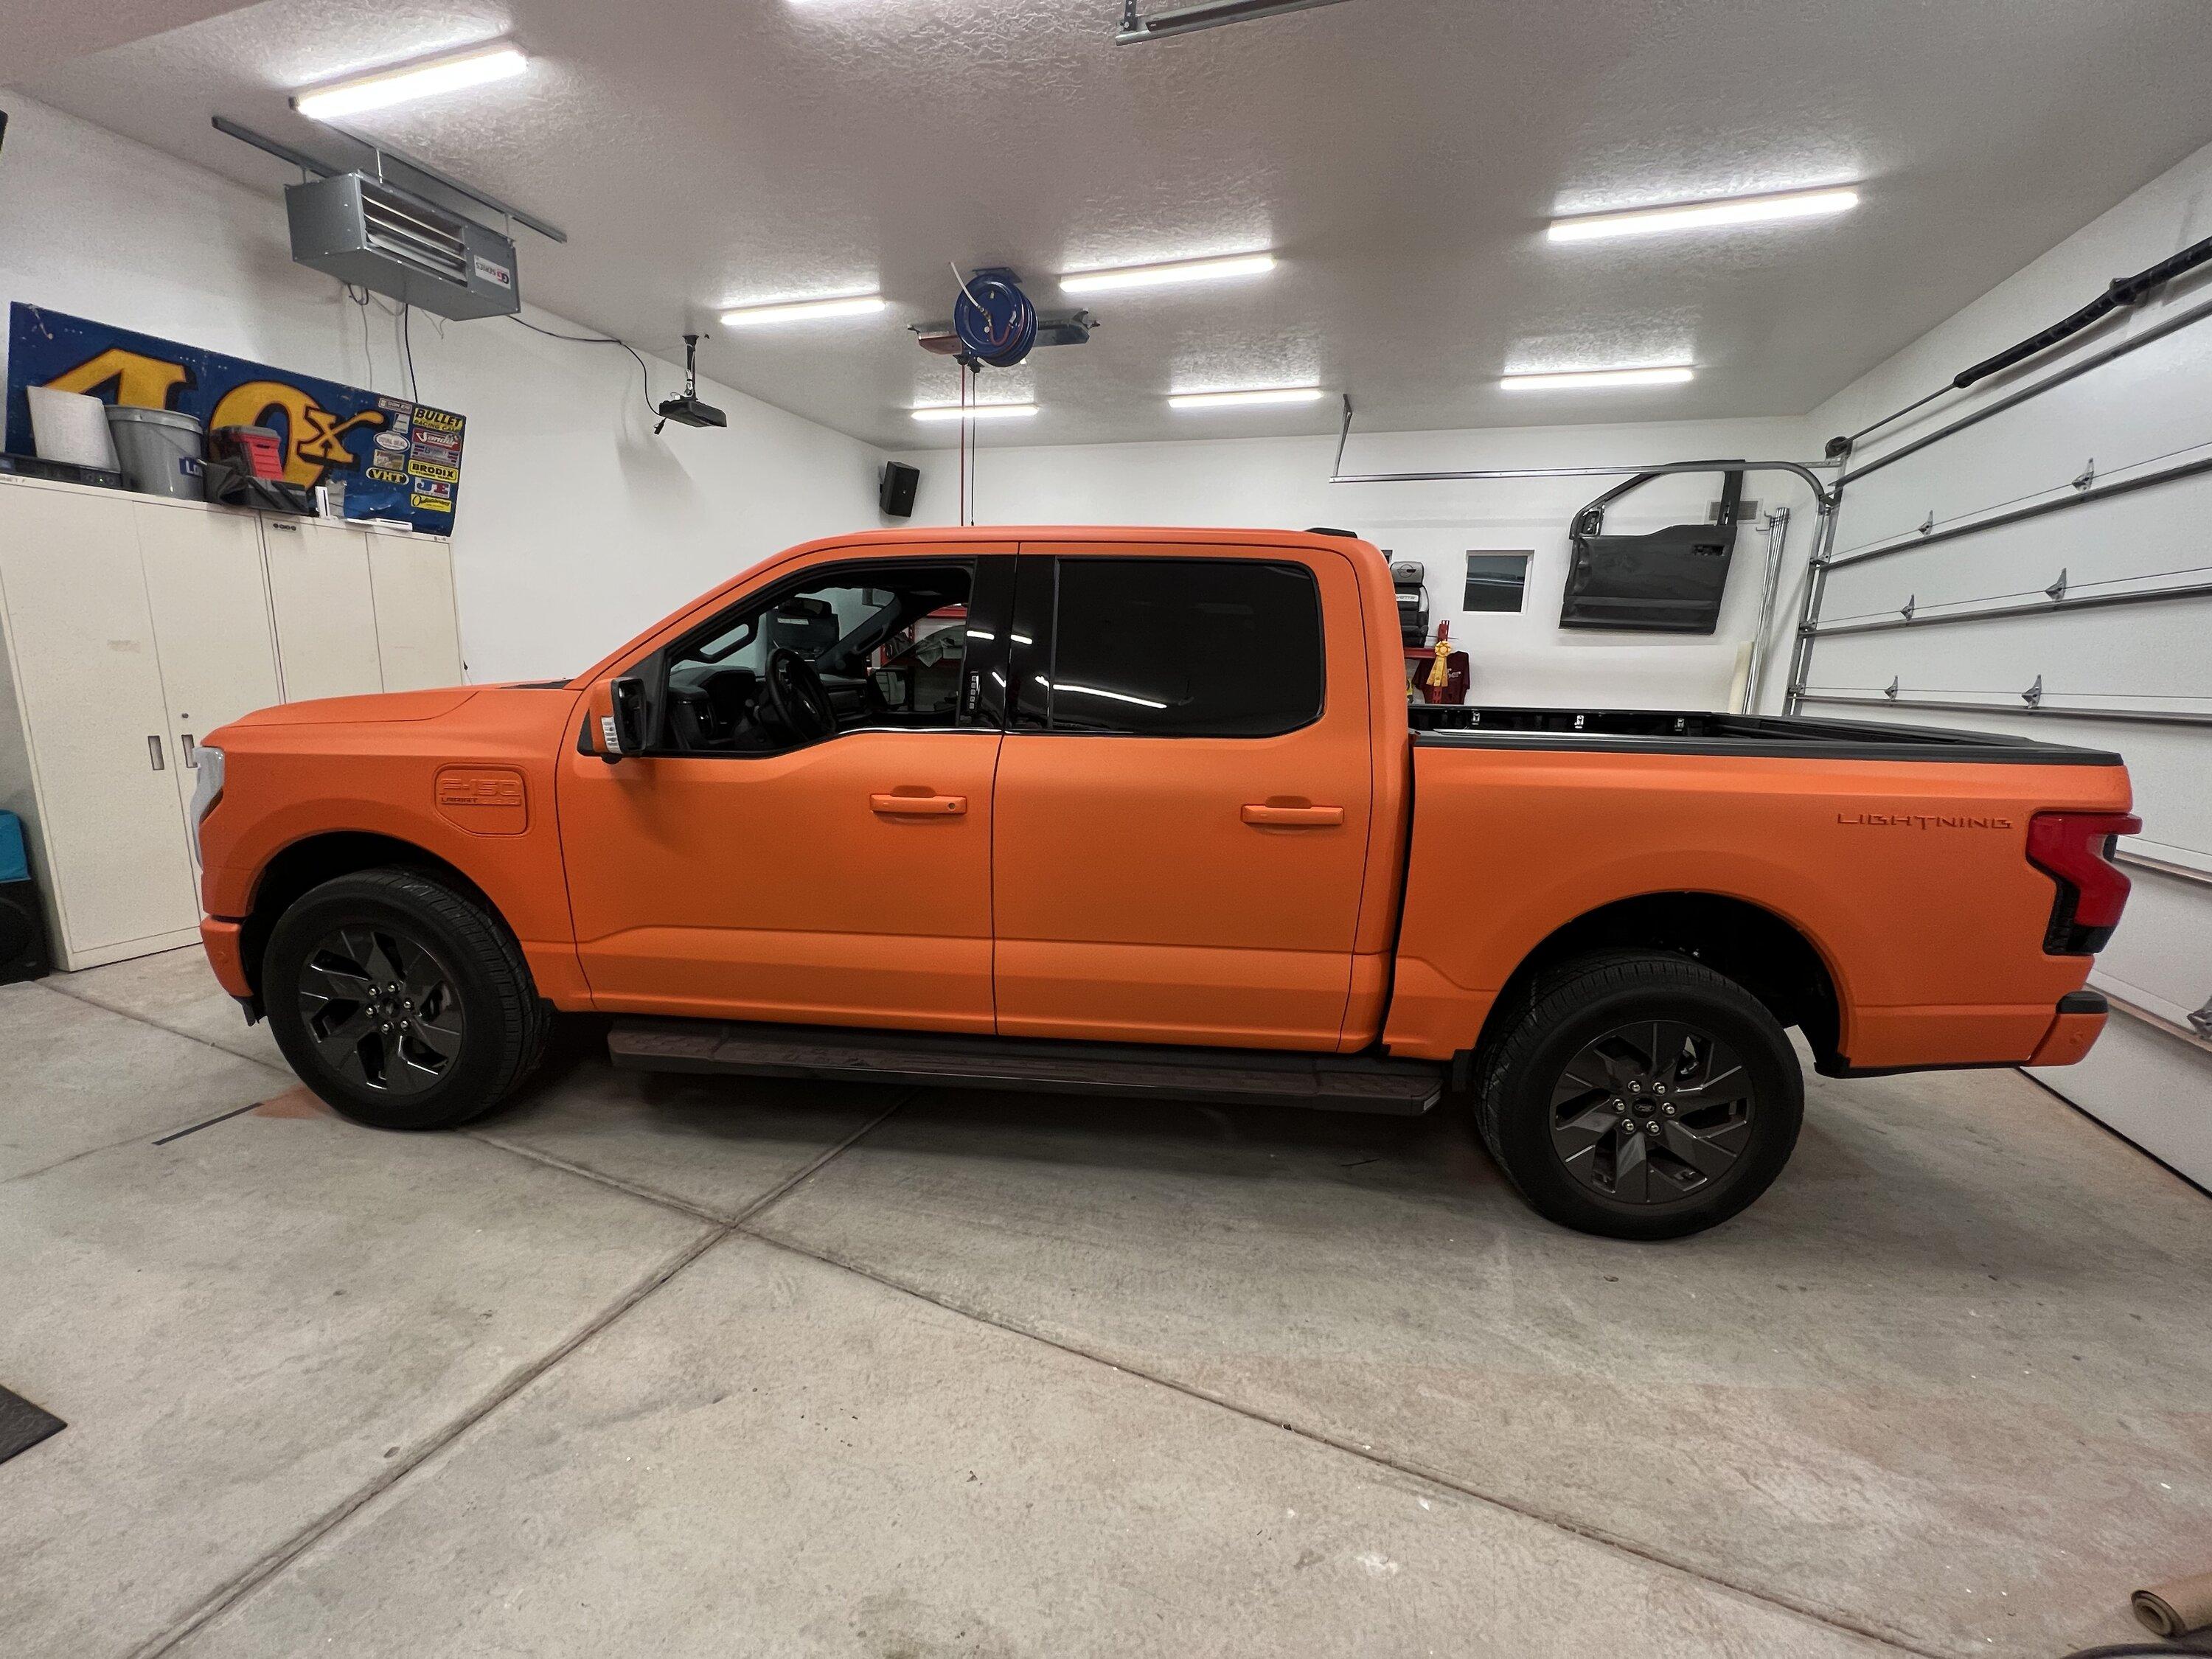 Ford F-150 Lightning Need opinions on dip color change 5E7B30BE-5A26-4F8A-91A2-328EAEBE60F7